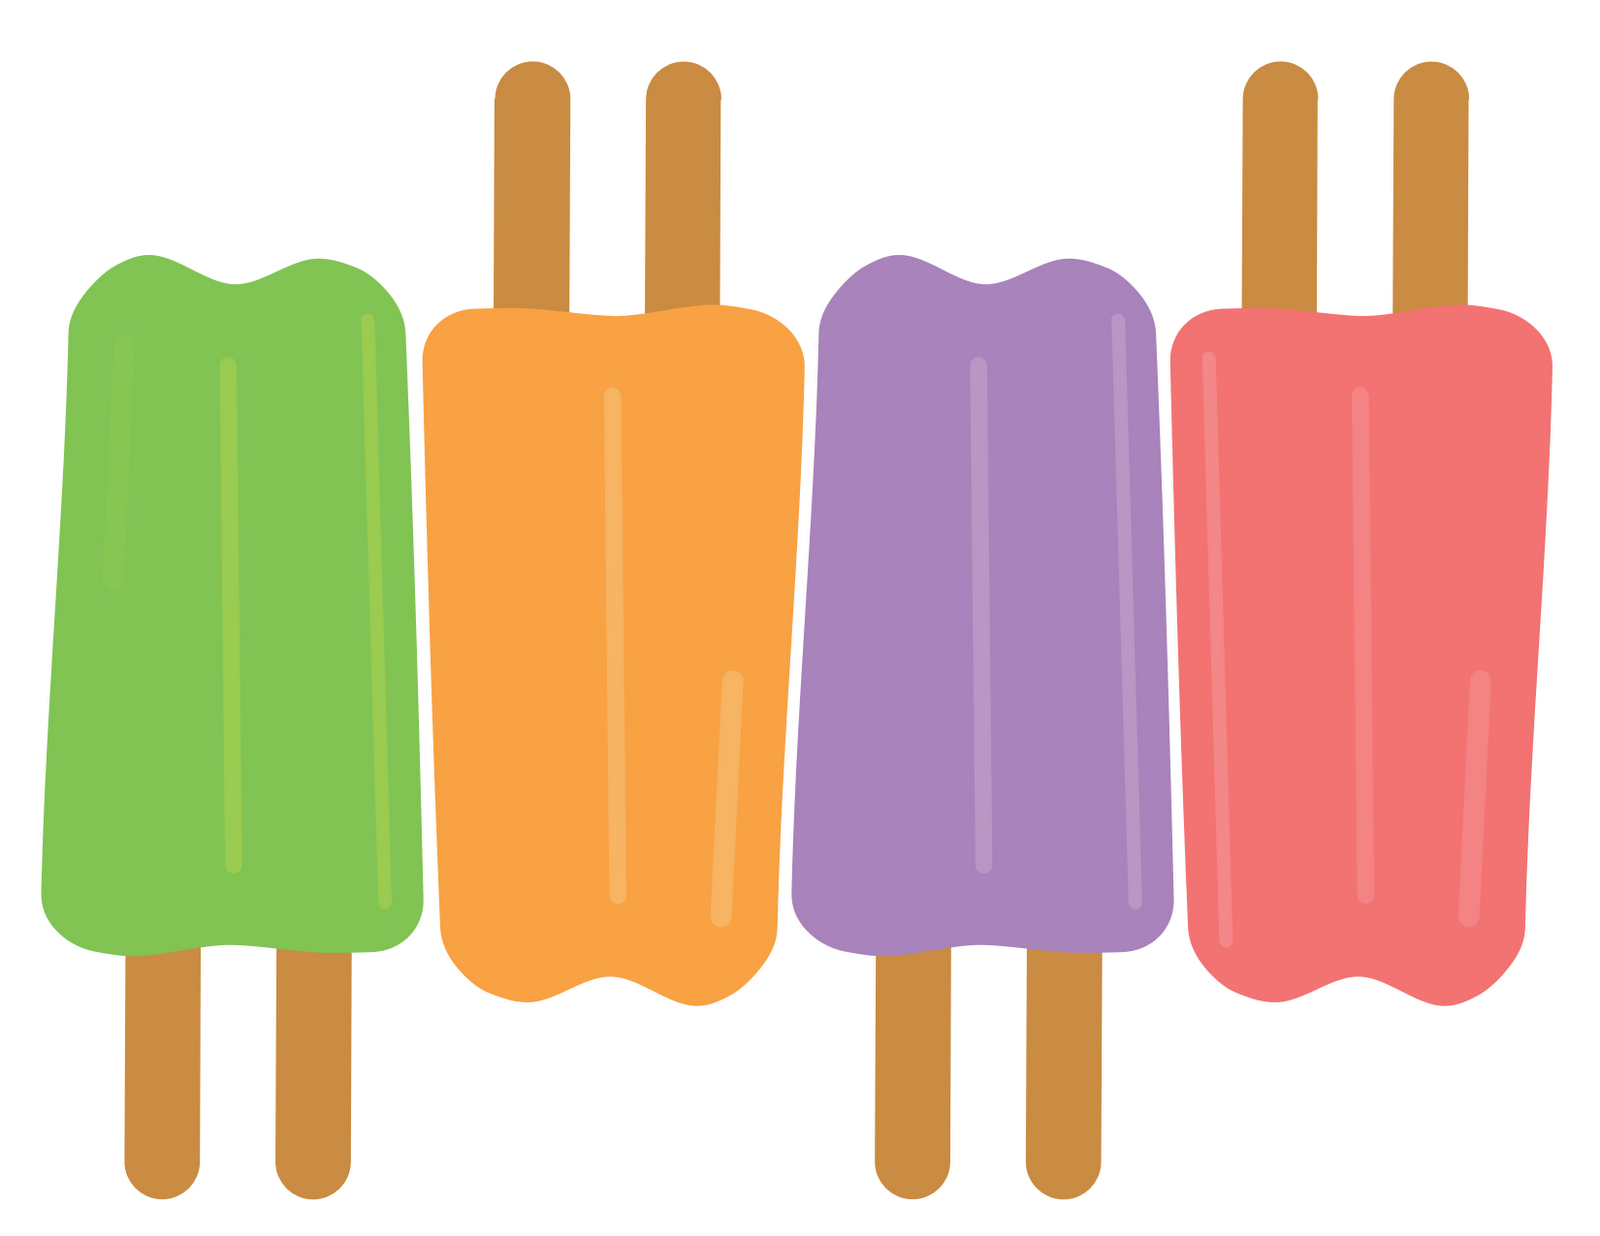 Free Popsicle Image, Download Free Clip Art, Free Clip Art On - Free Printable Popsicle Template